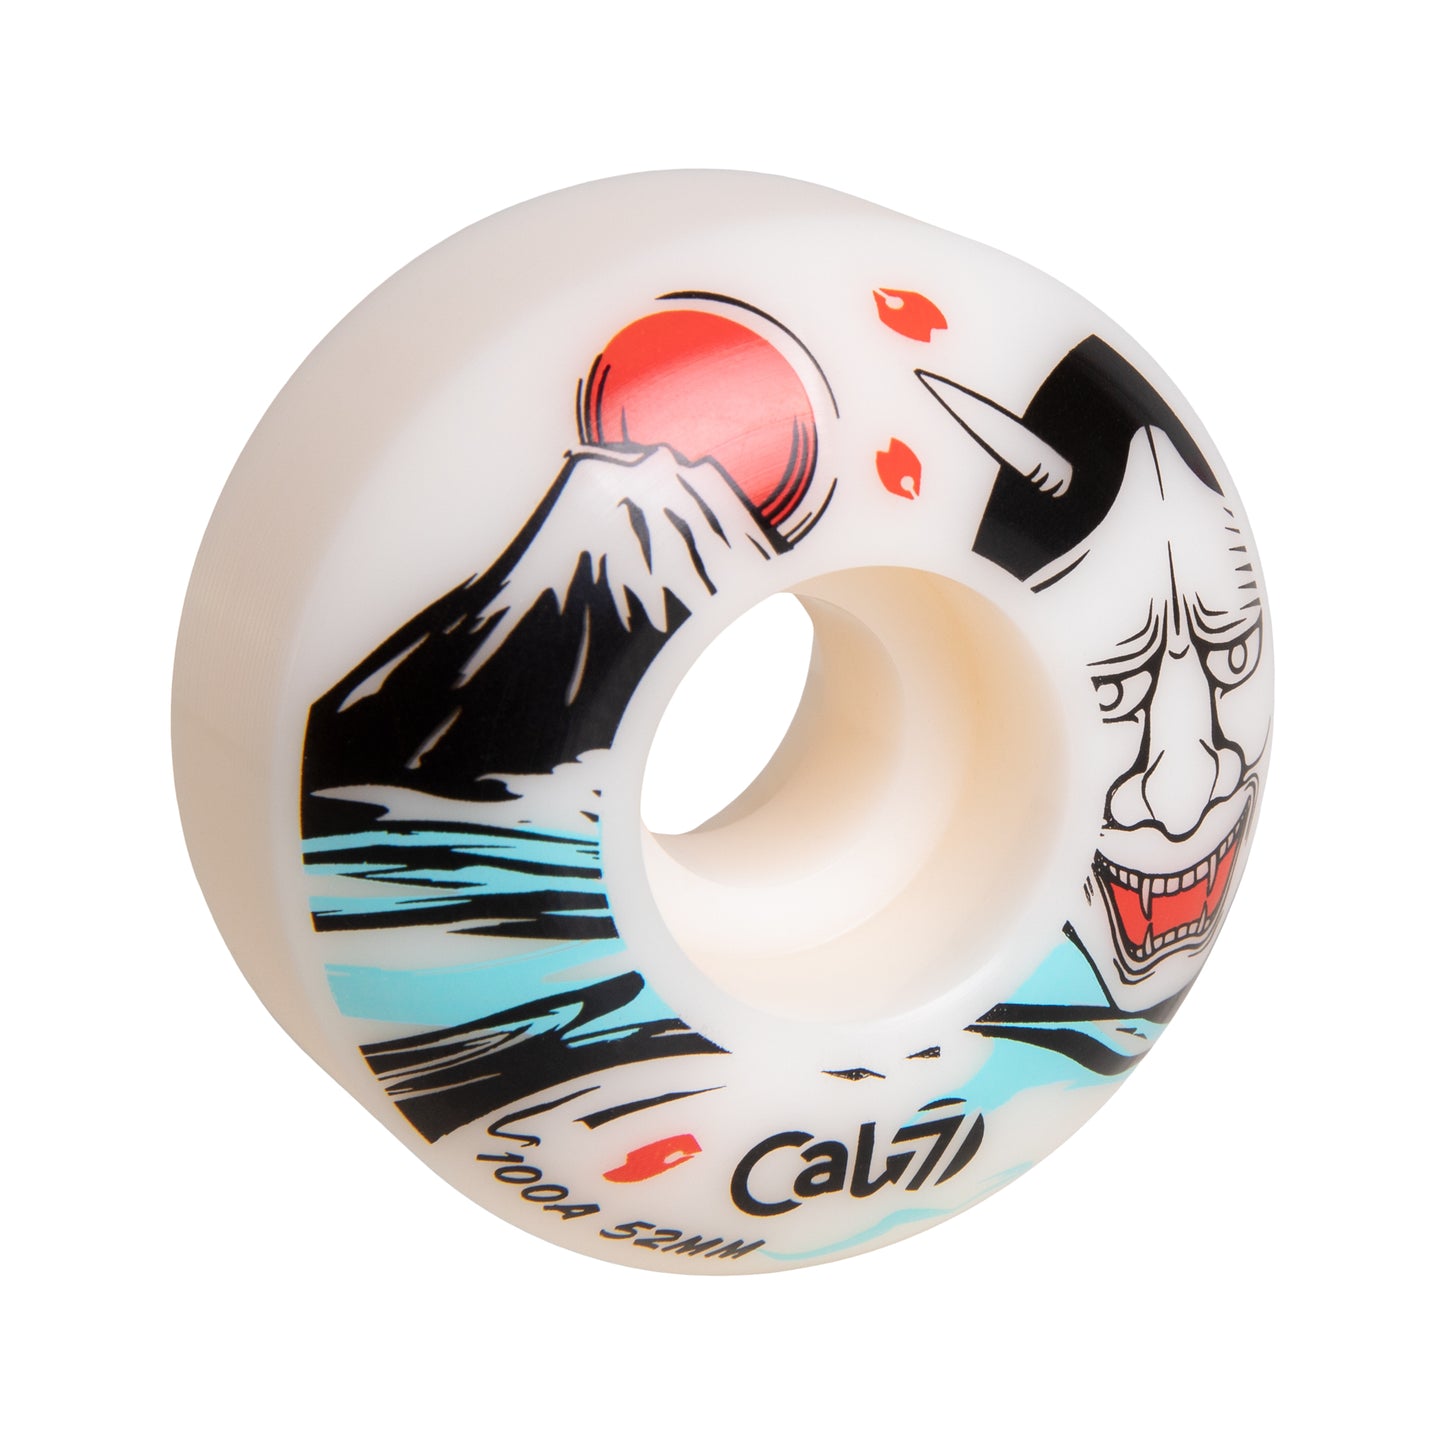 Cal 7 52mm 100A white skateboard wheels with Oni Japanese folklore illustration